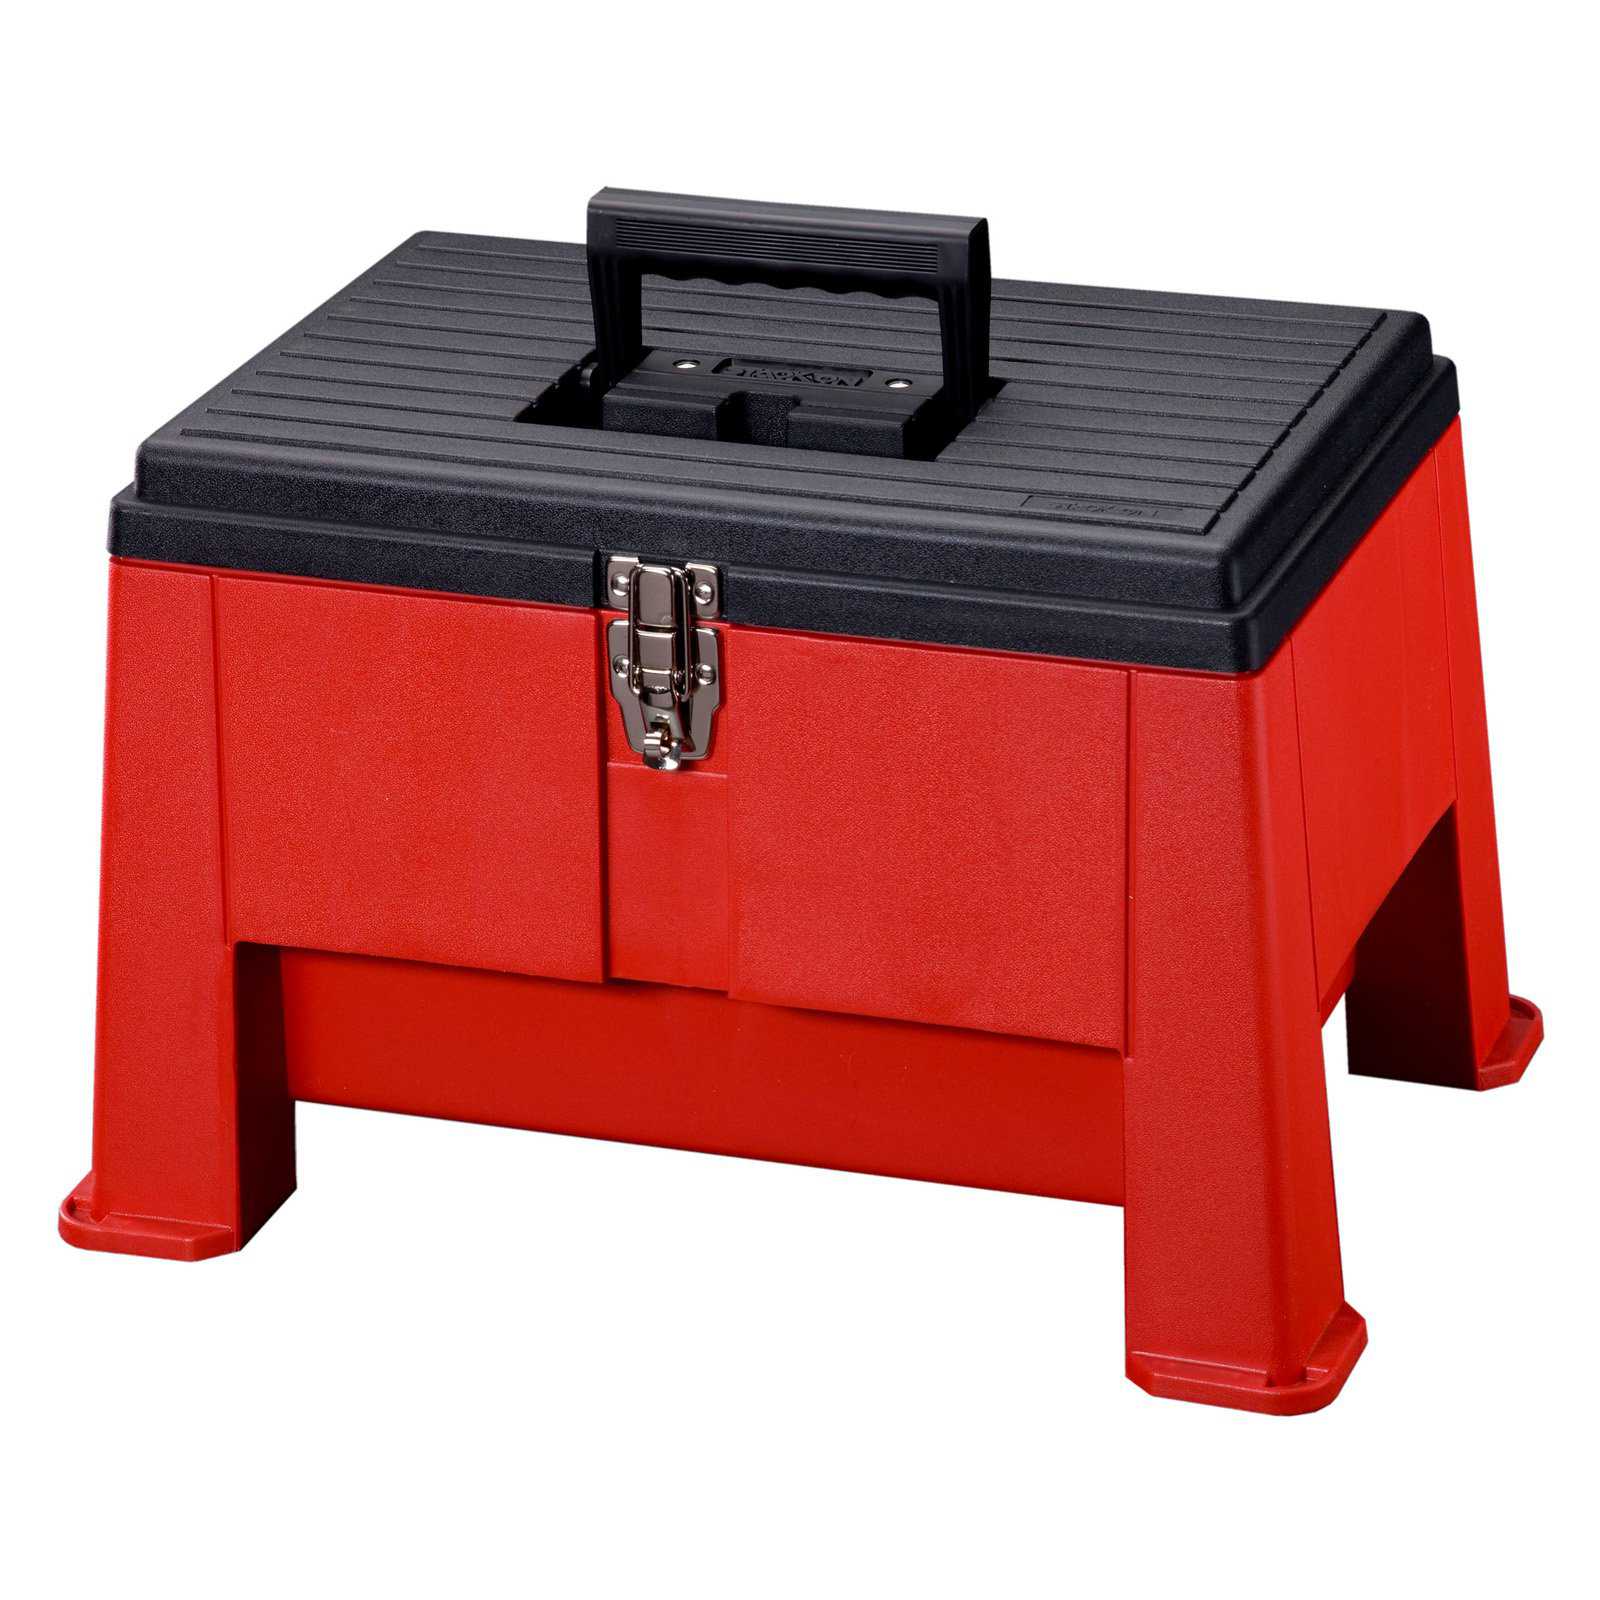 Stack-On 20' Step 'N Stor Tool Box, Red